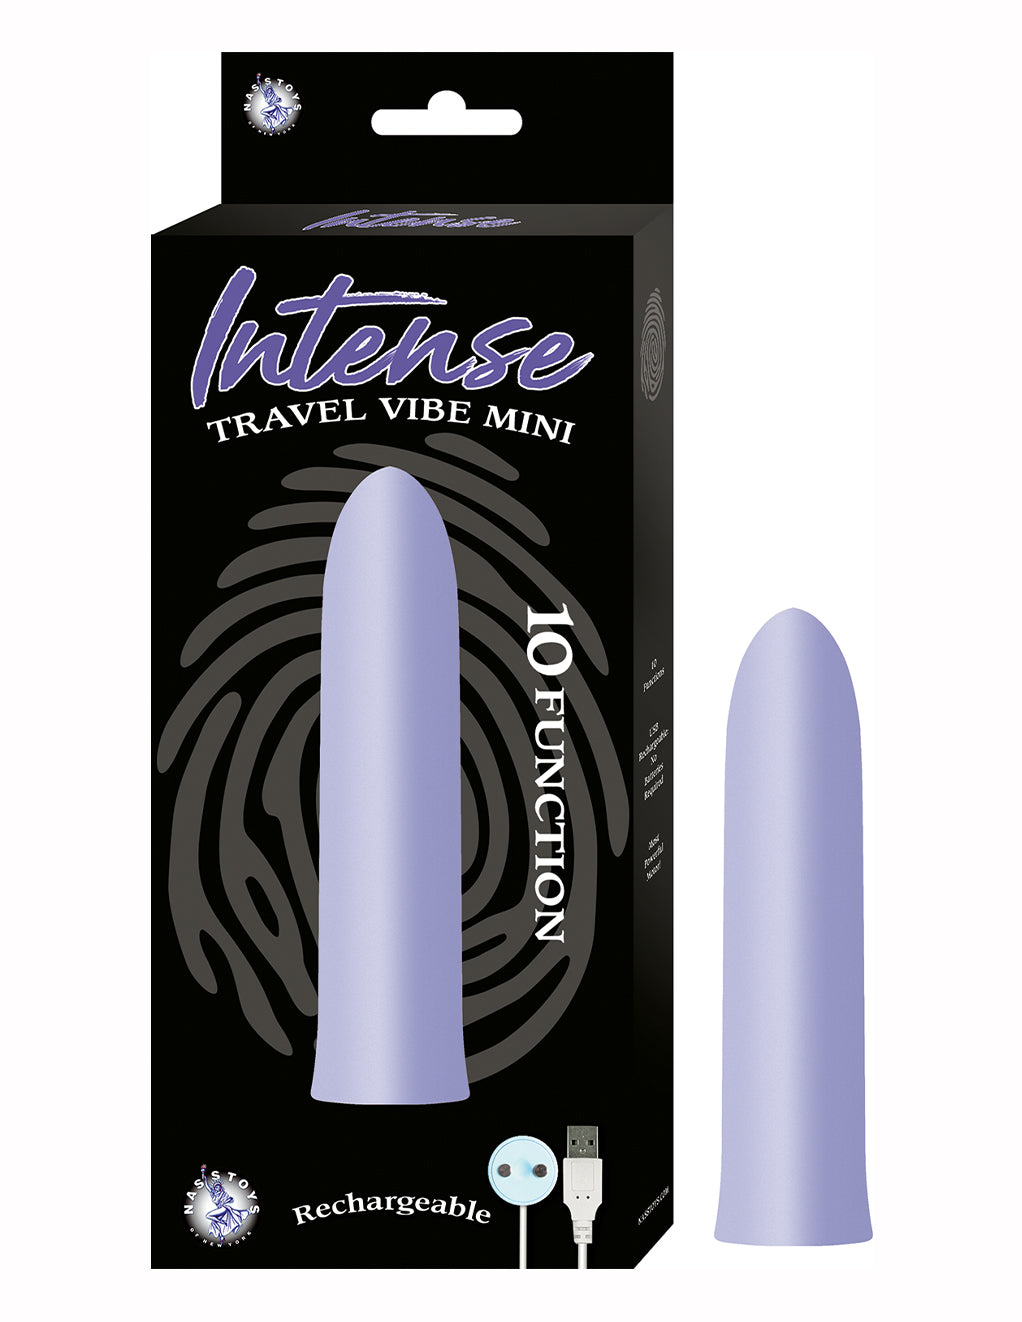 Intense Rechargeable 10 function Travel Vibe Mini- Purple- Front packaging